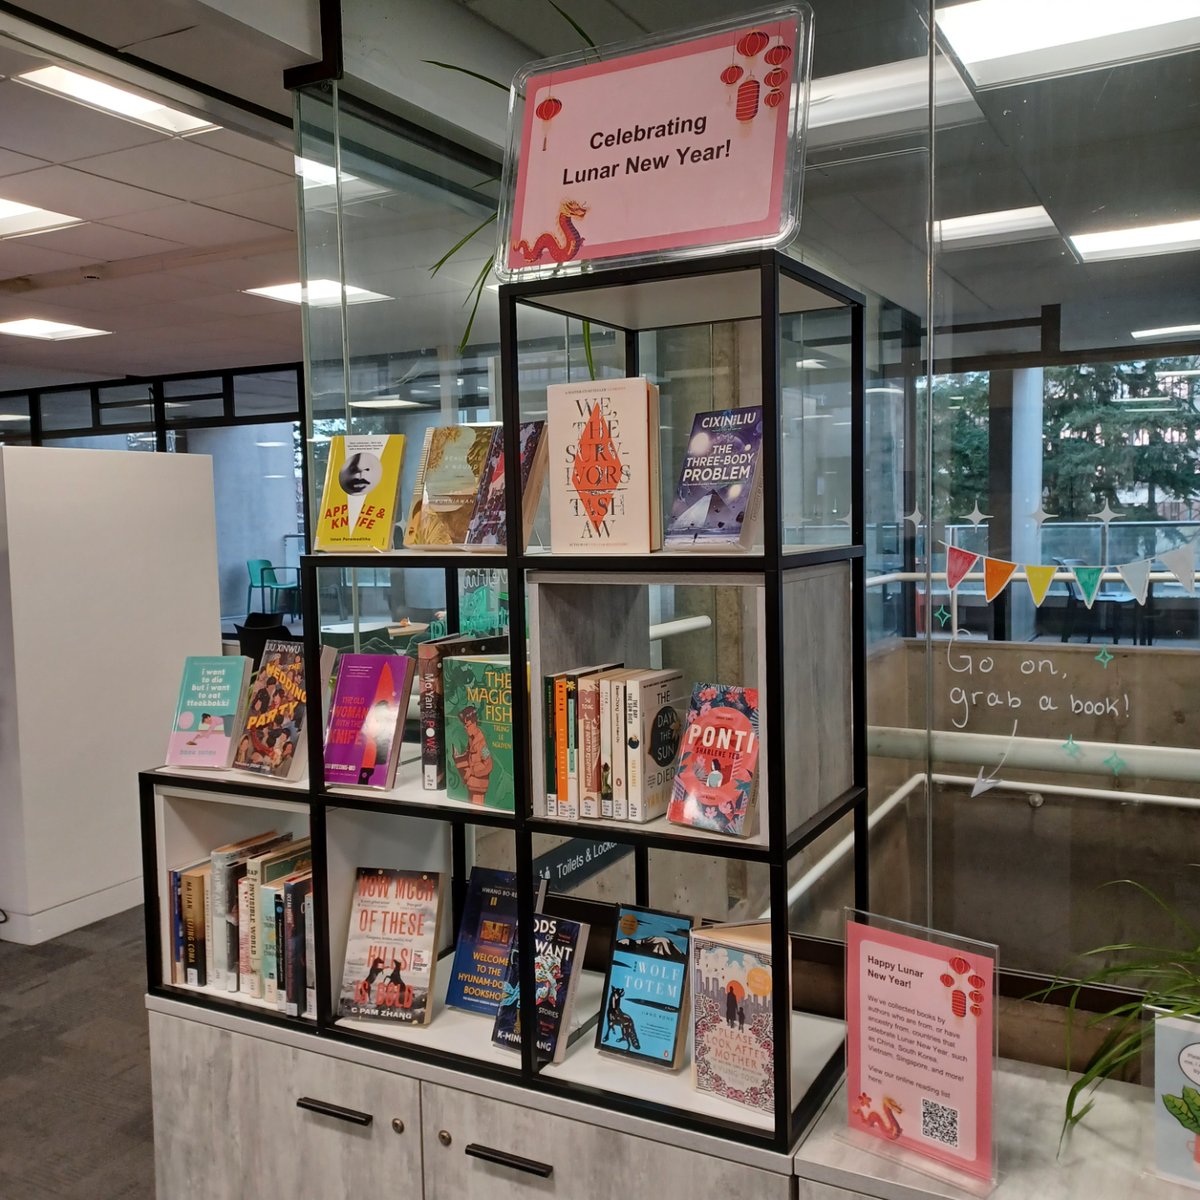 Wishing all those who celebrate a Happy Lunar New Year. And what better way to celebrate than to check out our brand new book display?  #LunarNewYear #BookDisplay #UEALibrary #UEA #NorwichUEA